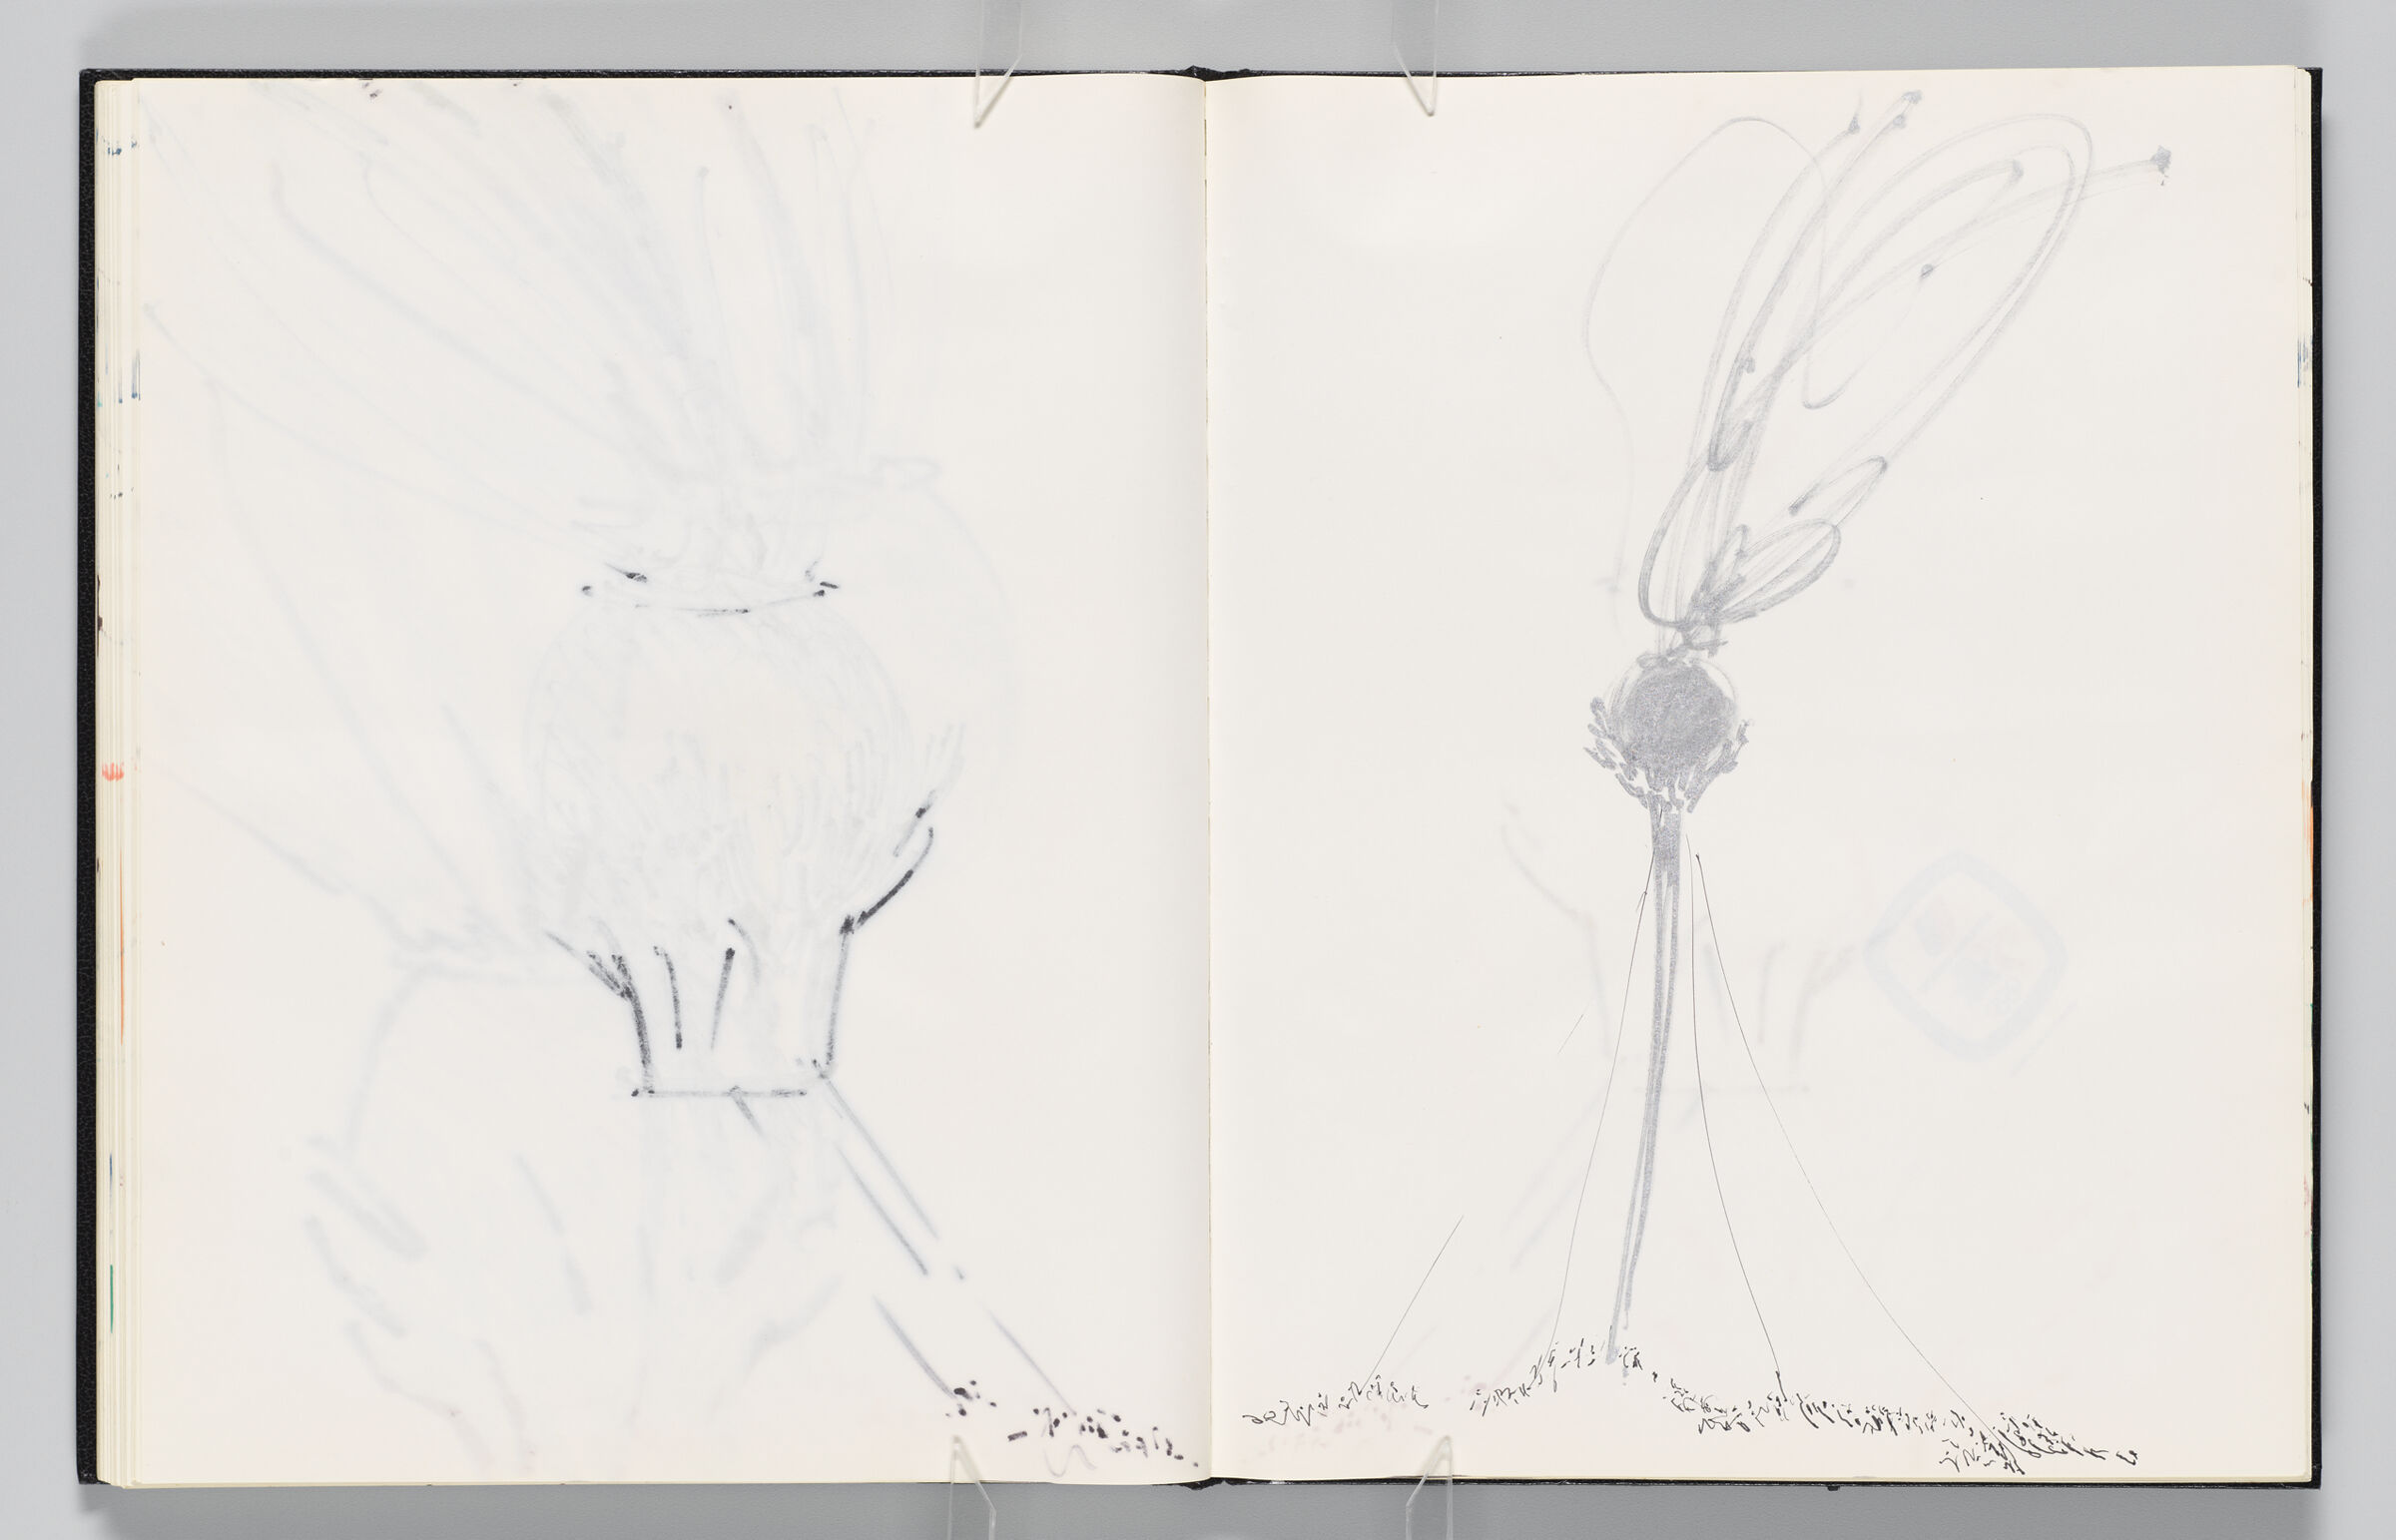 Untitled (Bleed-Through Of Previous Page, Left Page); Untitled (Hands Holding Globe With Crowd Below, Right Page)